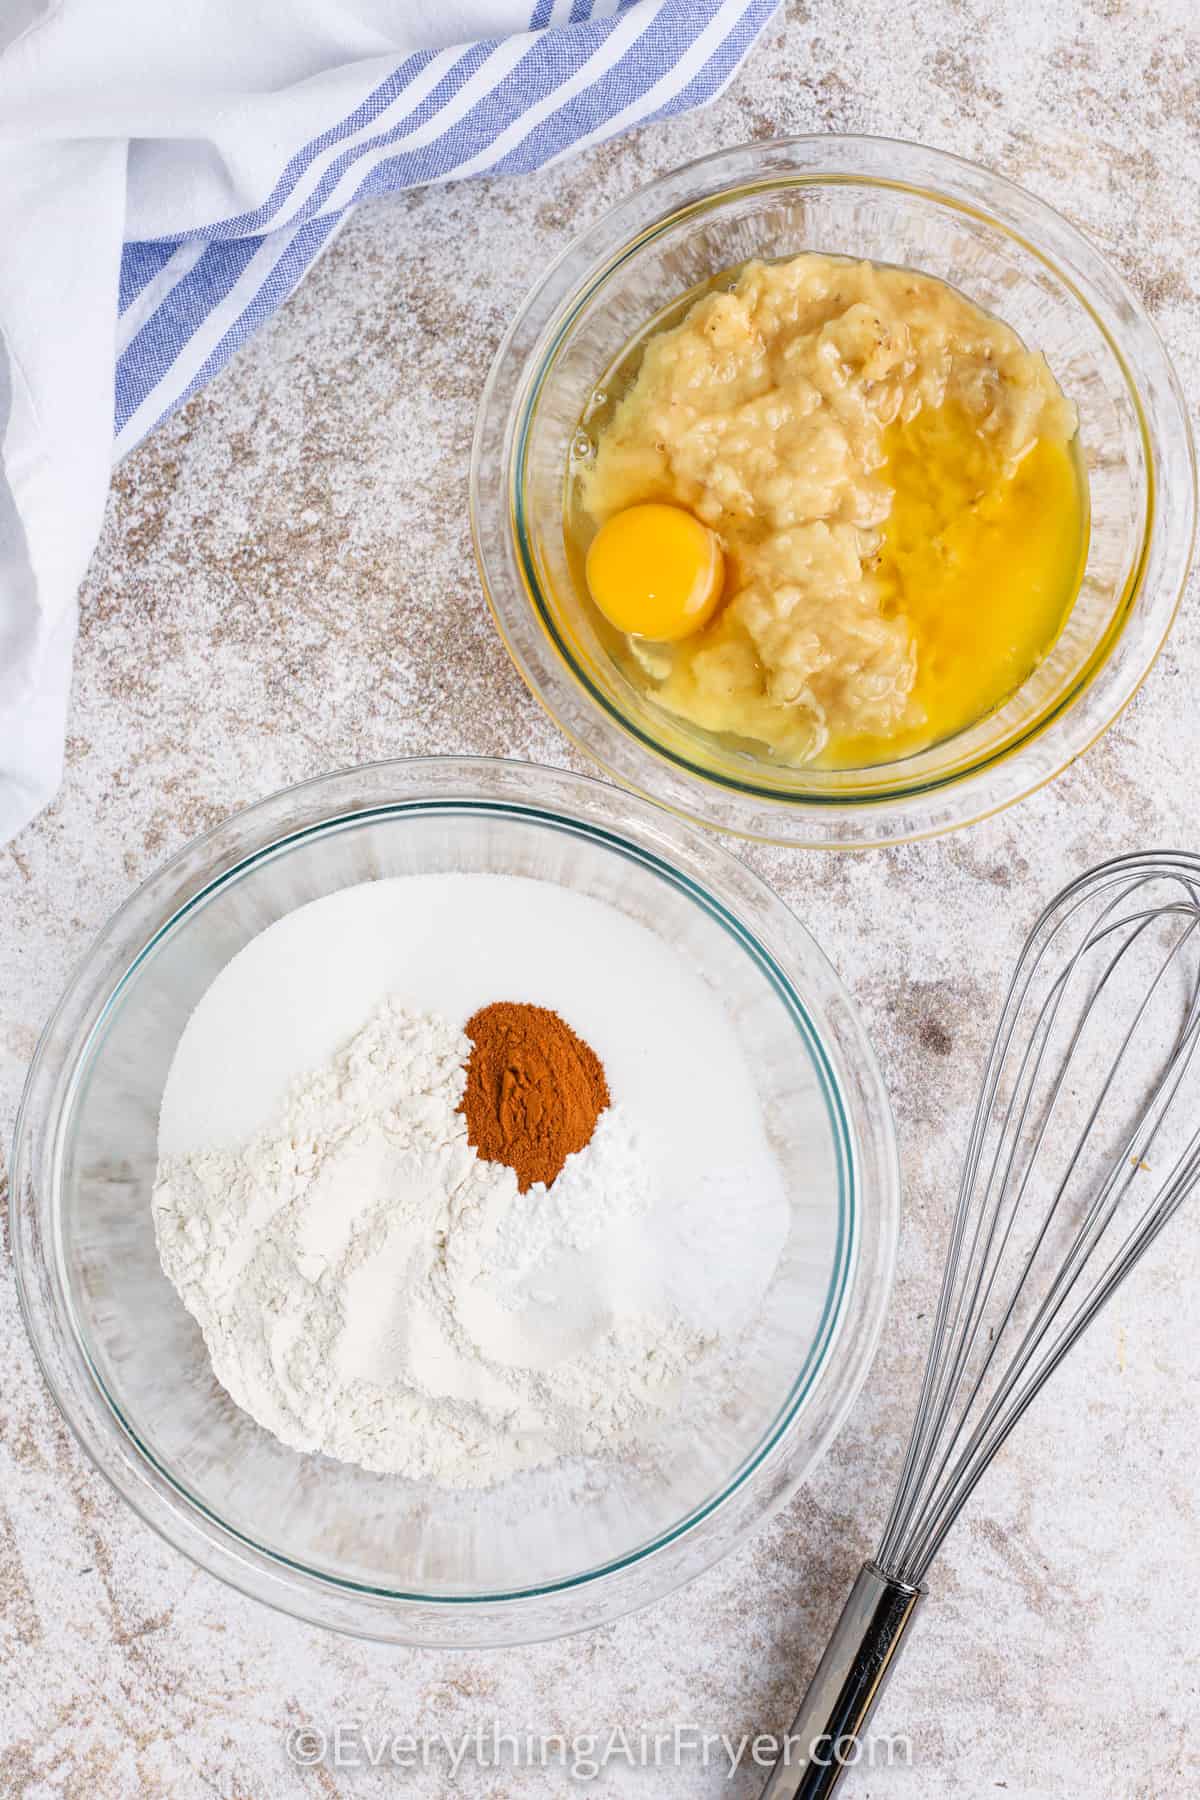 wet and dry ingredients in bowls to make Air Fryer Banana Muffins